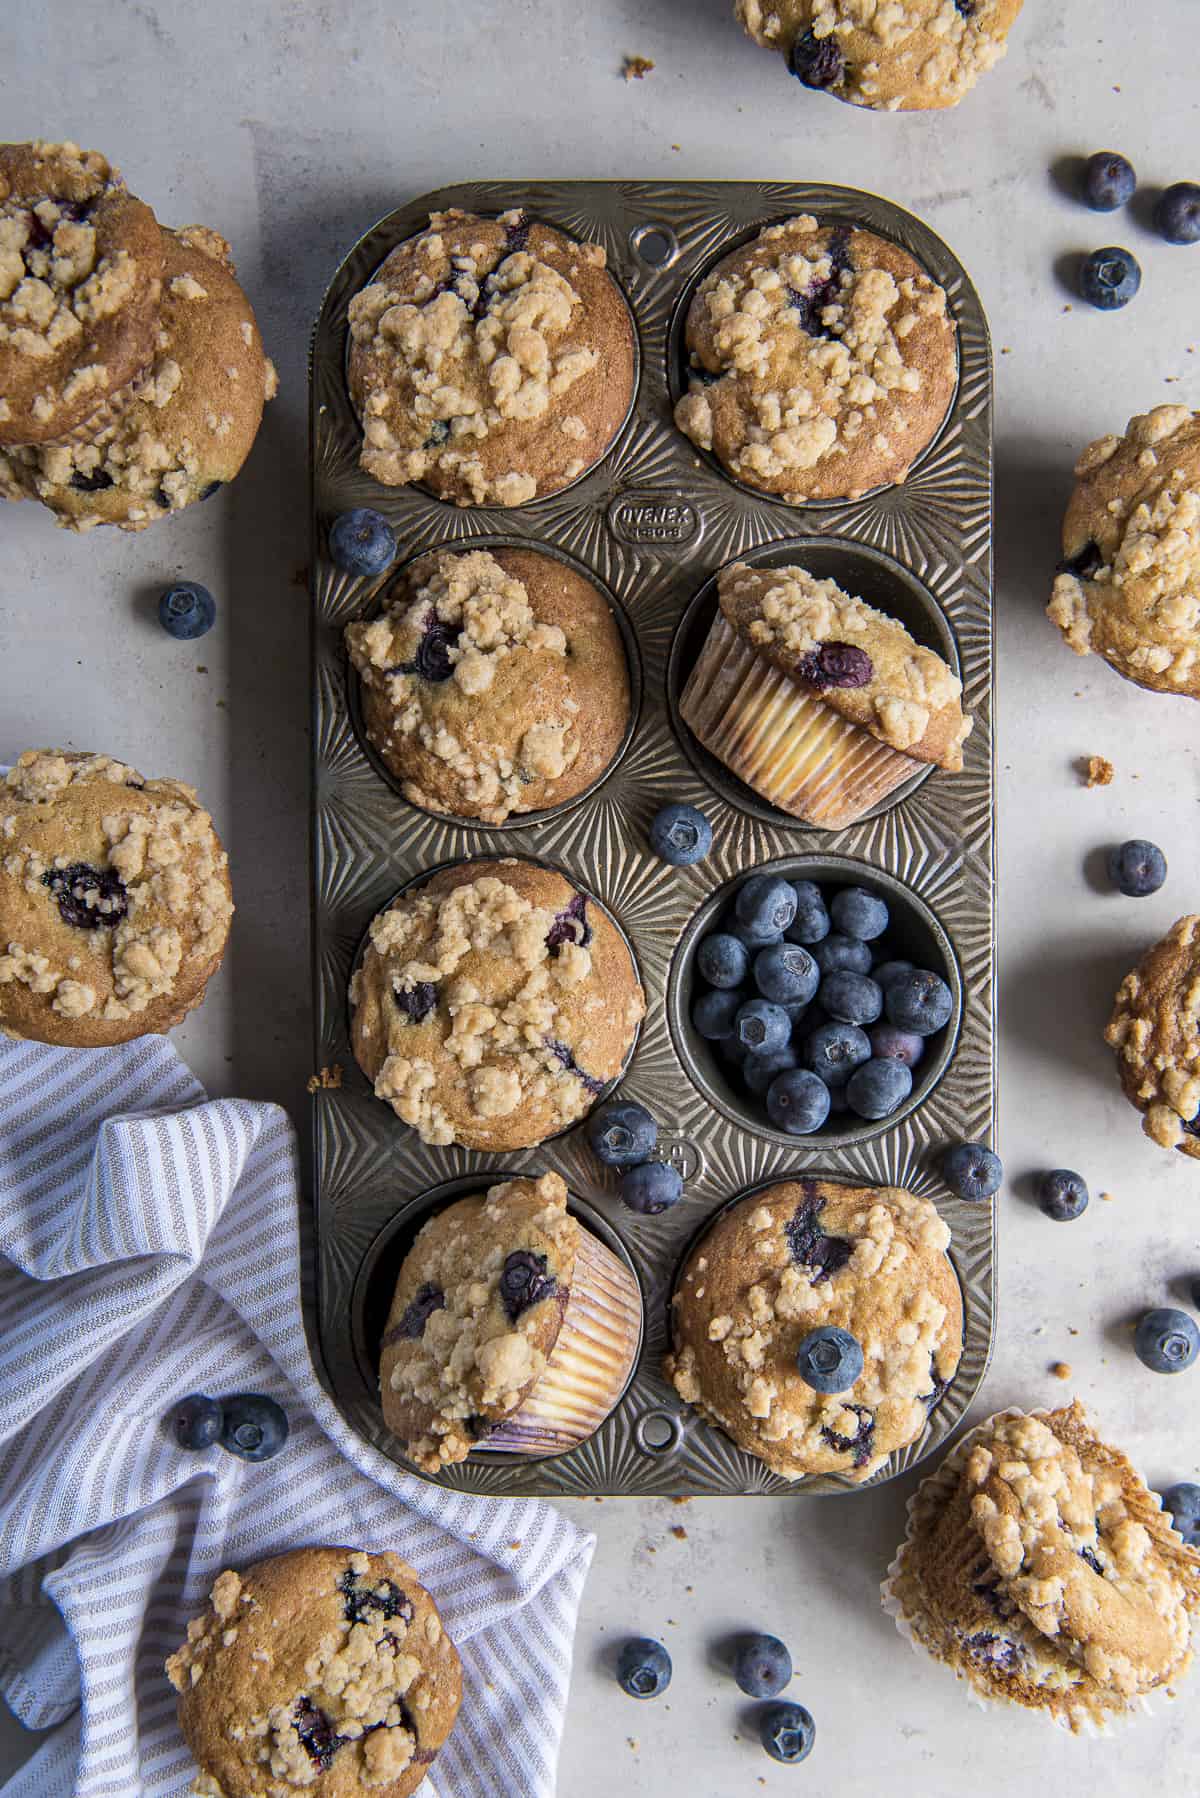 a vintage muffin pan full of blueberry cheesecake muffins, with blueberries scattered around.